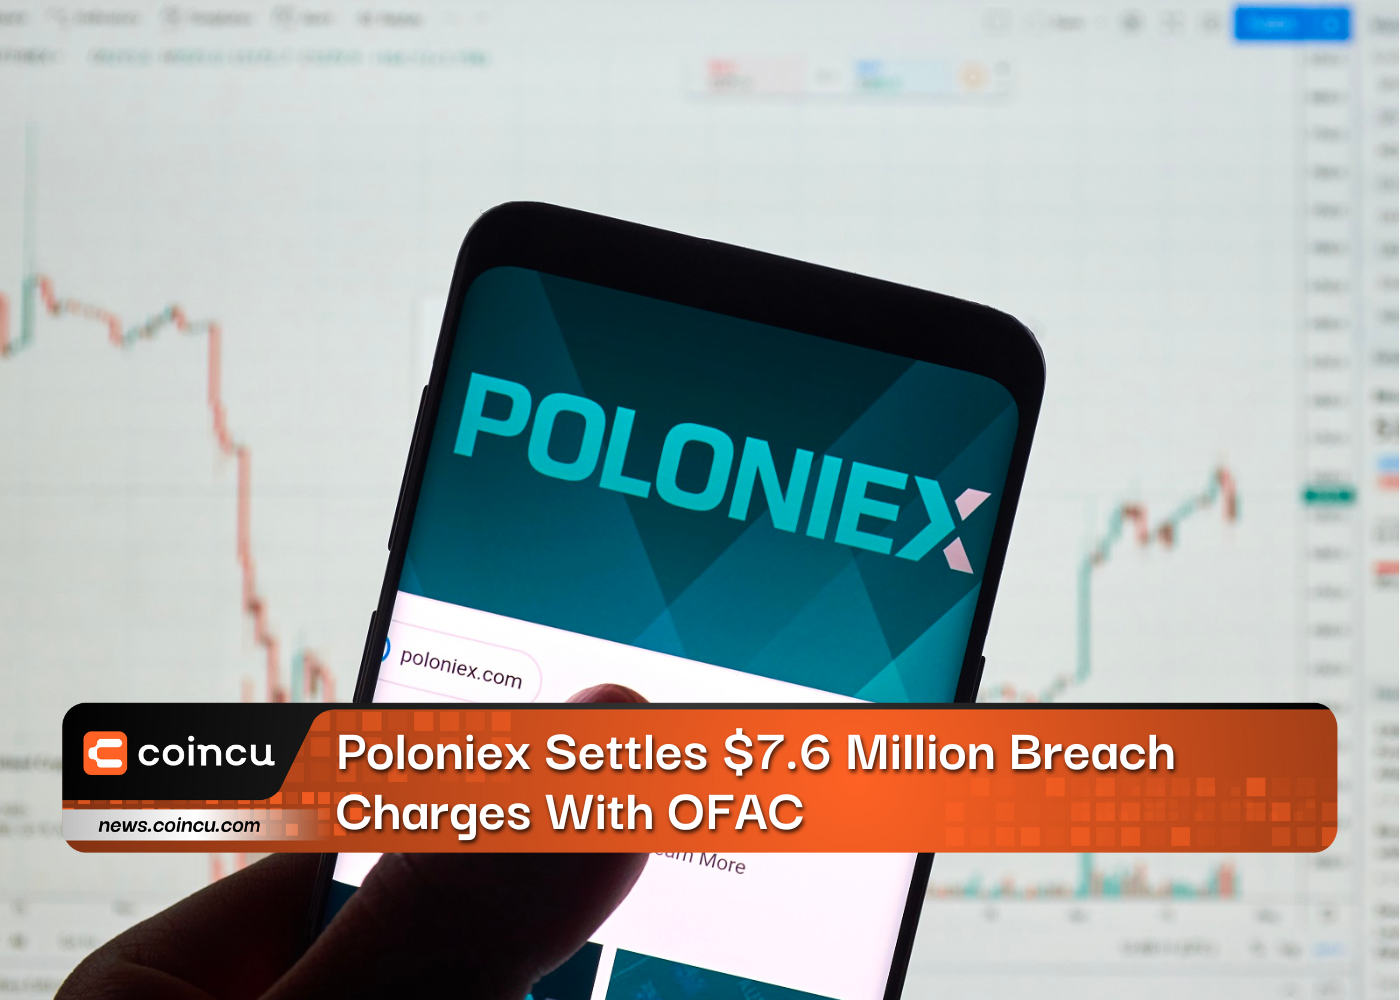 Poloniex Settles $7.6 Million Breach Charges With OFAC